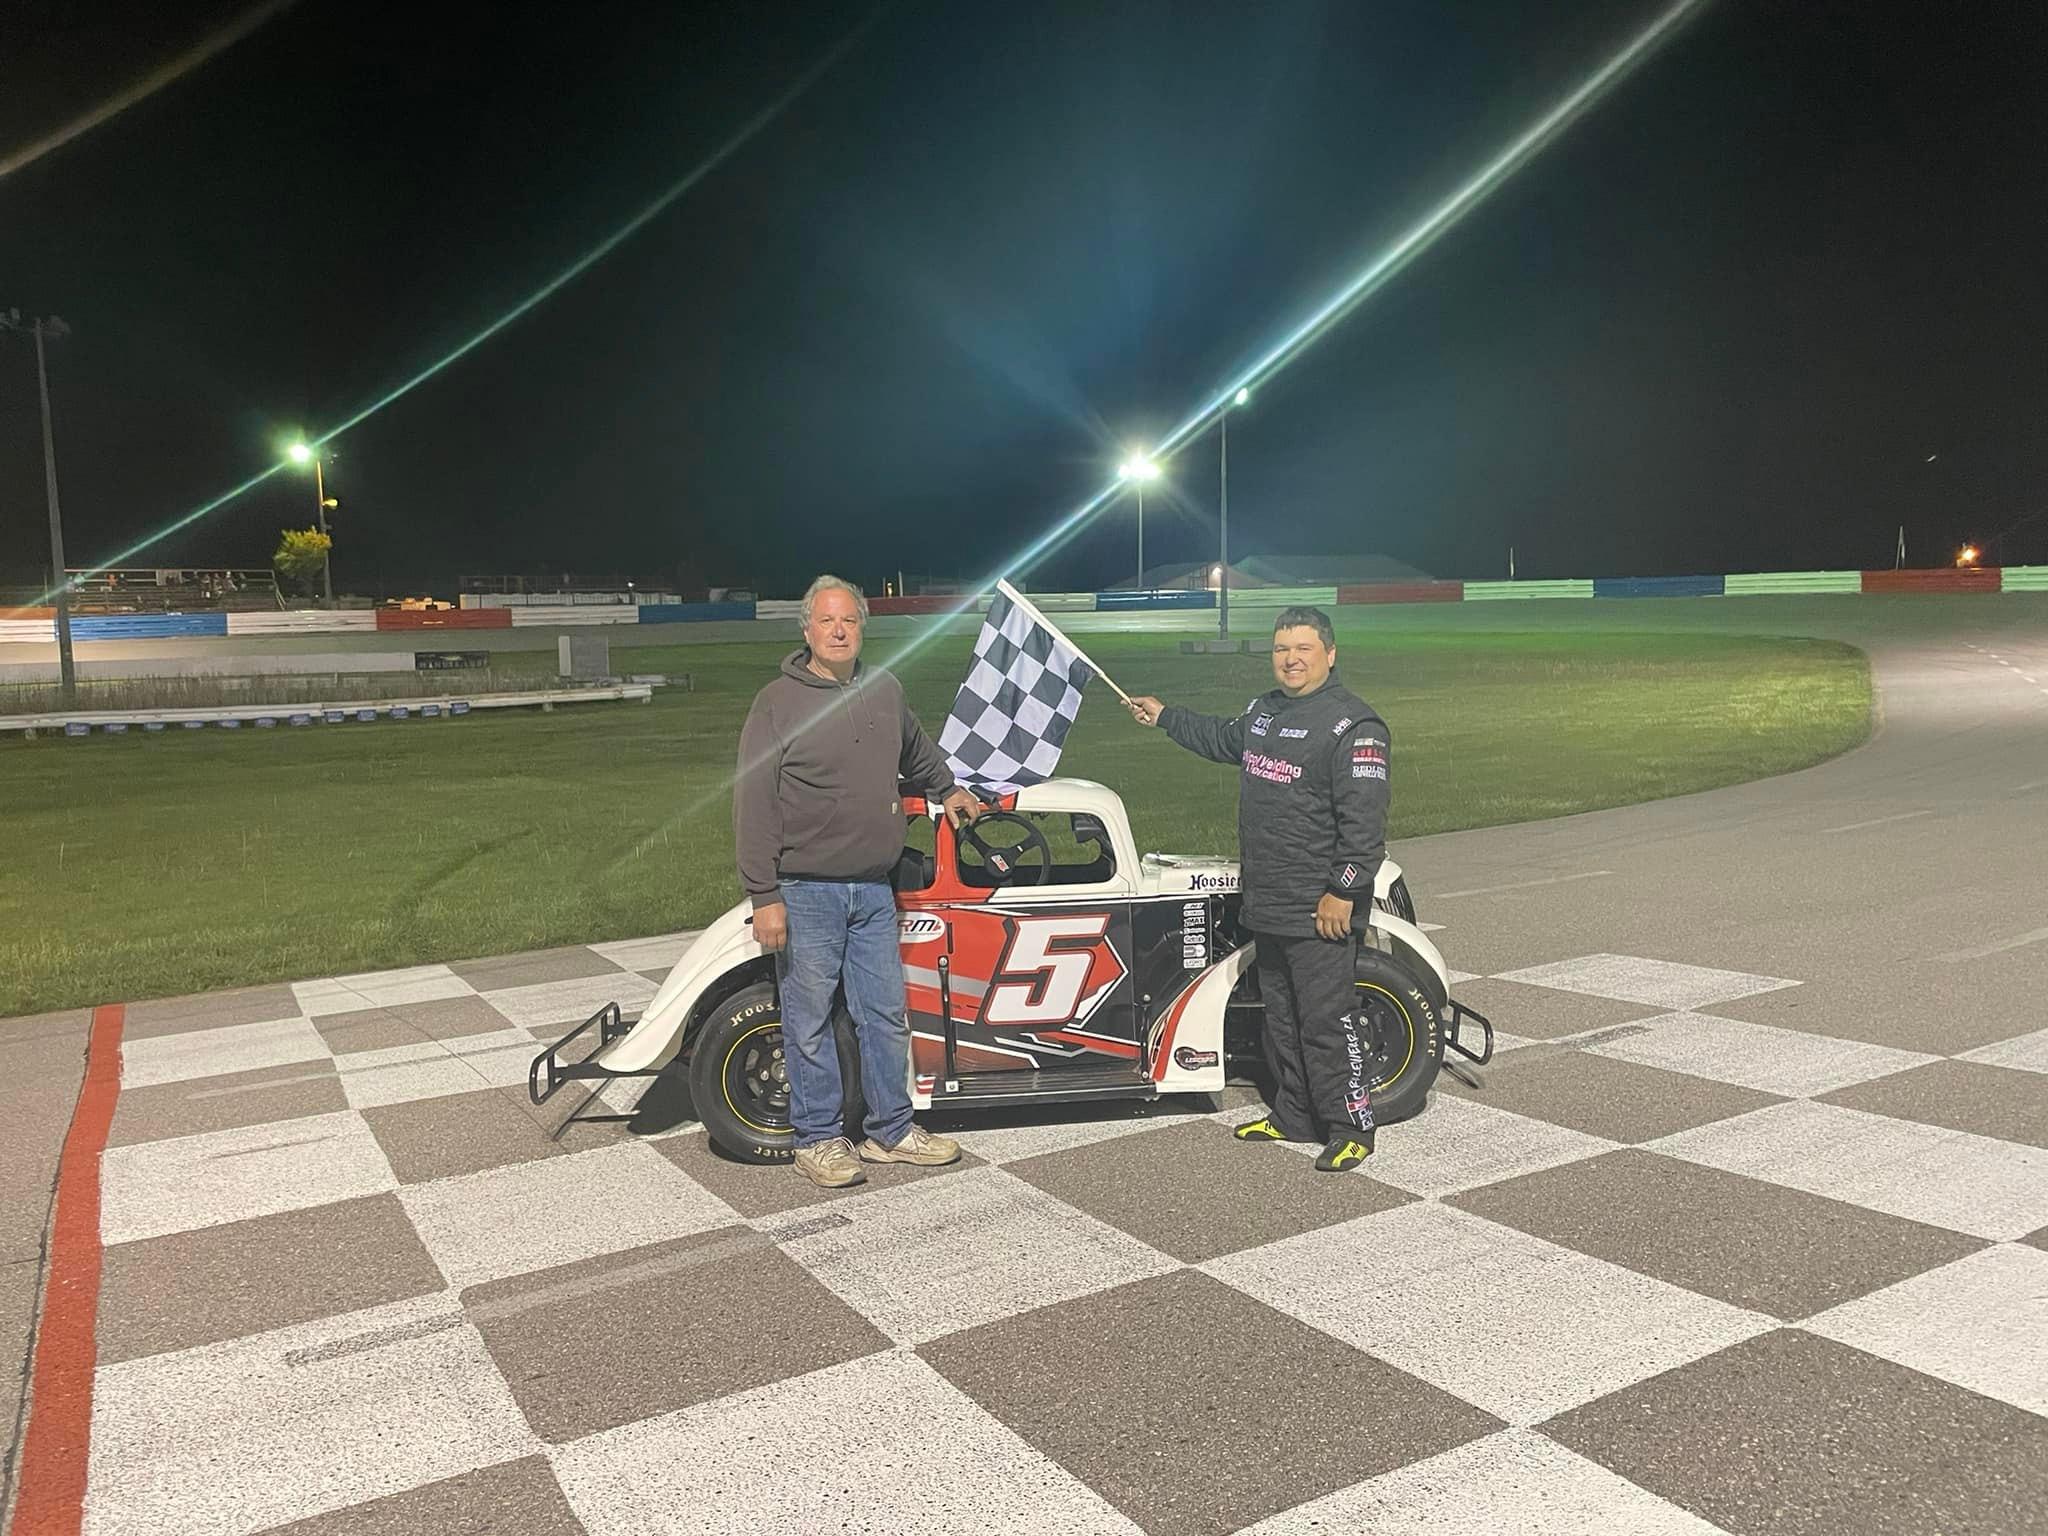 Kenny McNicol Wins The 2022 Qwick Wick Great Lakes Legends Series Championship